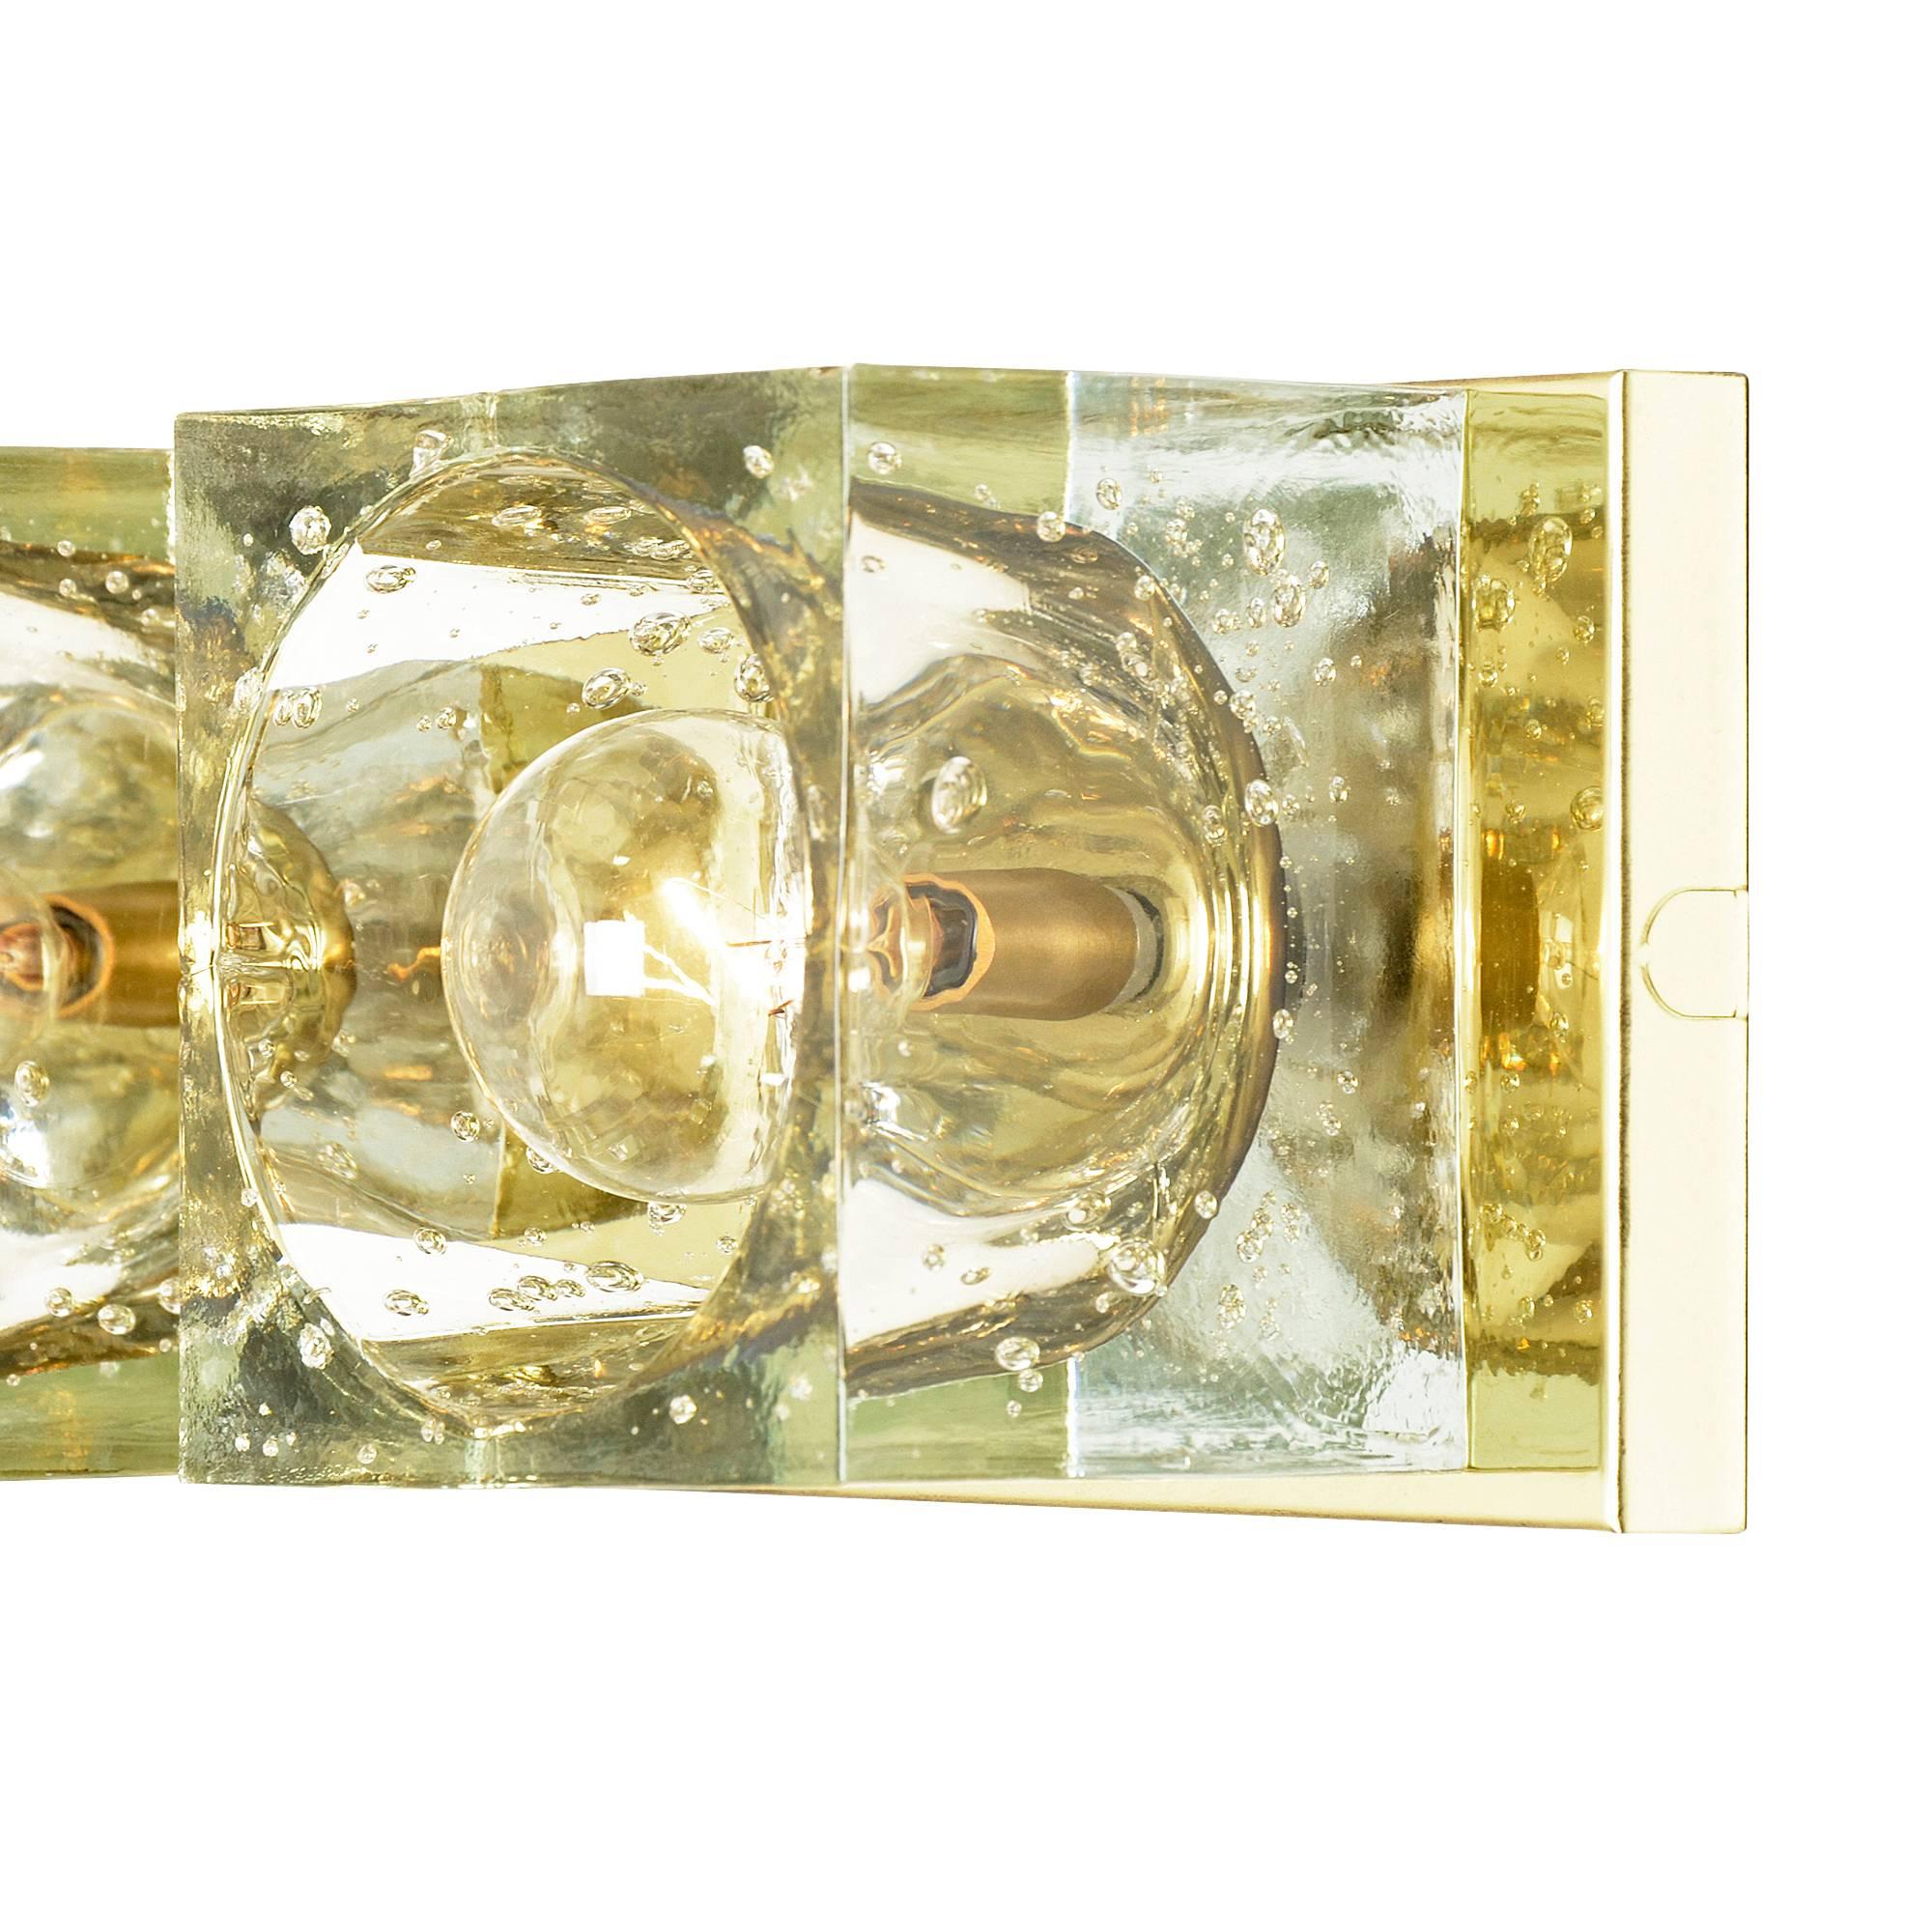 The 1976 Lightolier catalog calls this the Mirage sconce, and promises that it will provide a "fantasy of reflections." Conceived by one of Modernism's great designers, Gaetano Sciolari, Lightolier produced the Mirage sconce to have